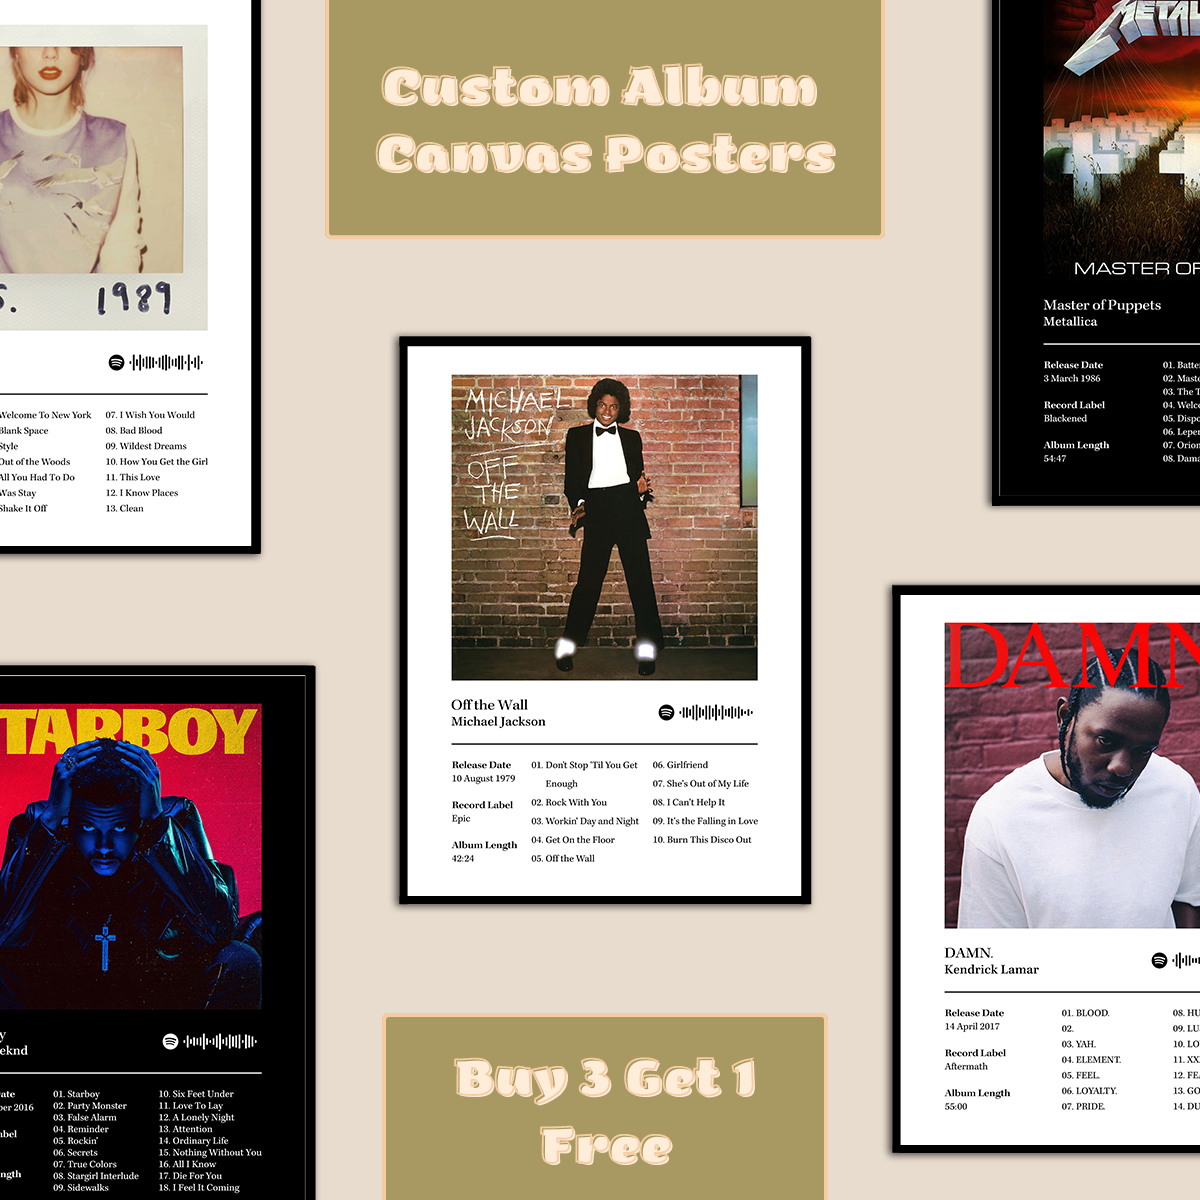 Create your own album poster! – Poster Crew